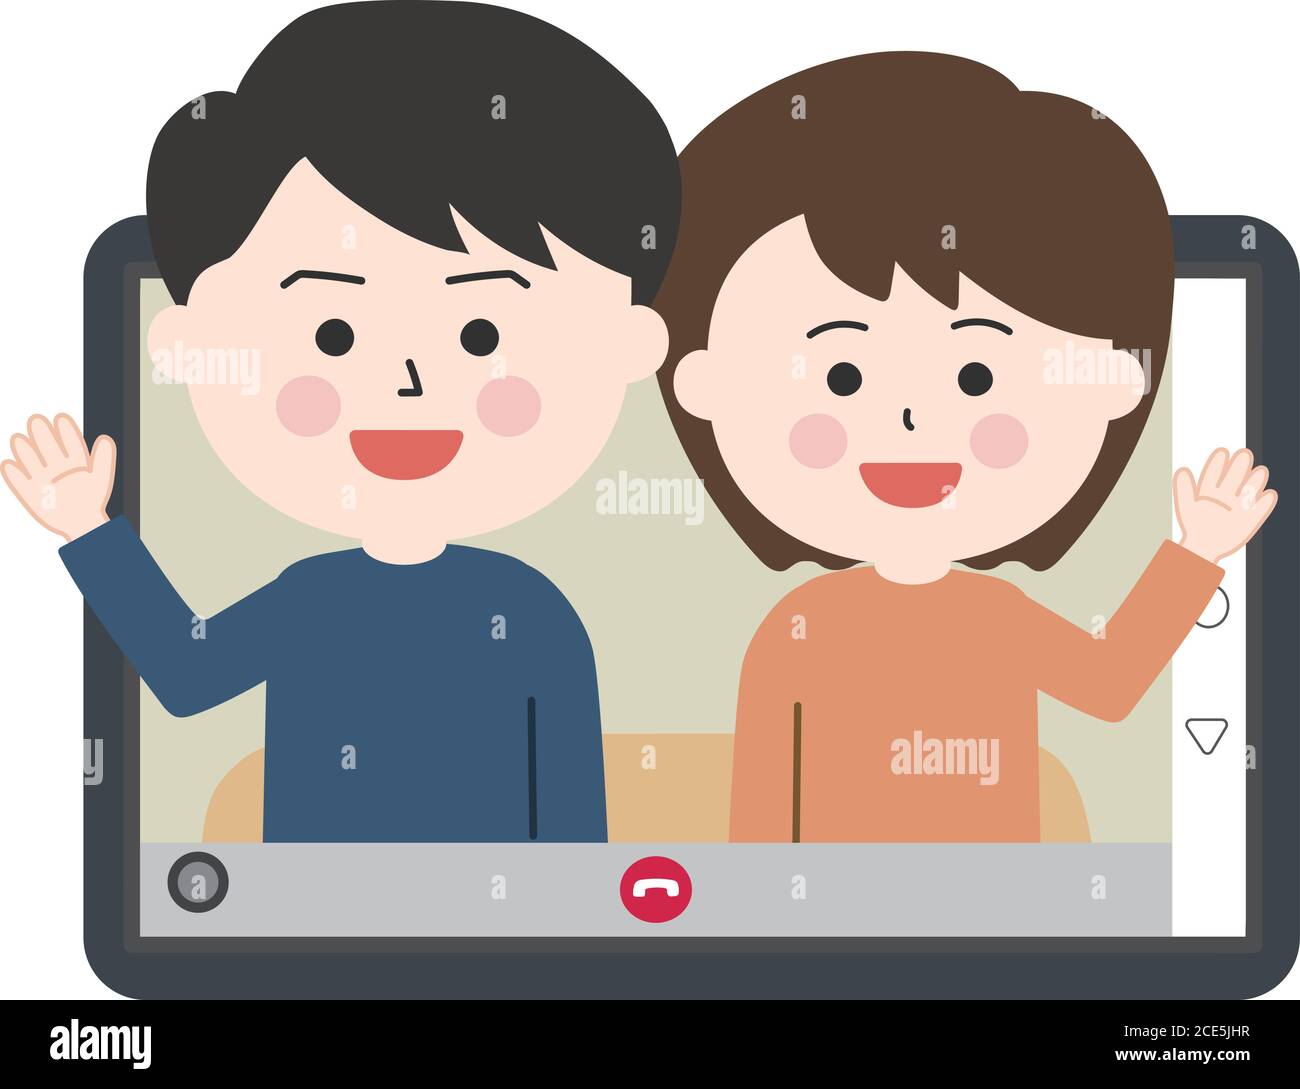 Man and woman sitting on the sofa and having video call on tablet or laptop. Vector illustration isolated on white background. Stock Vector